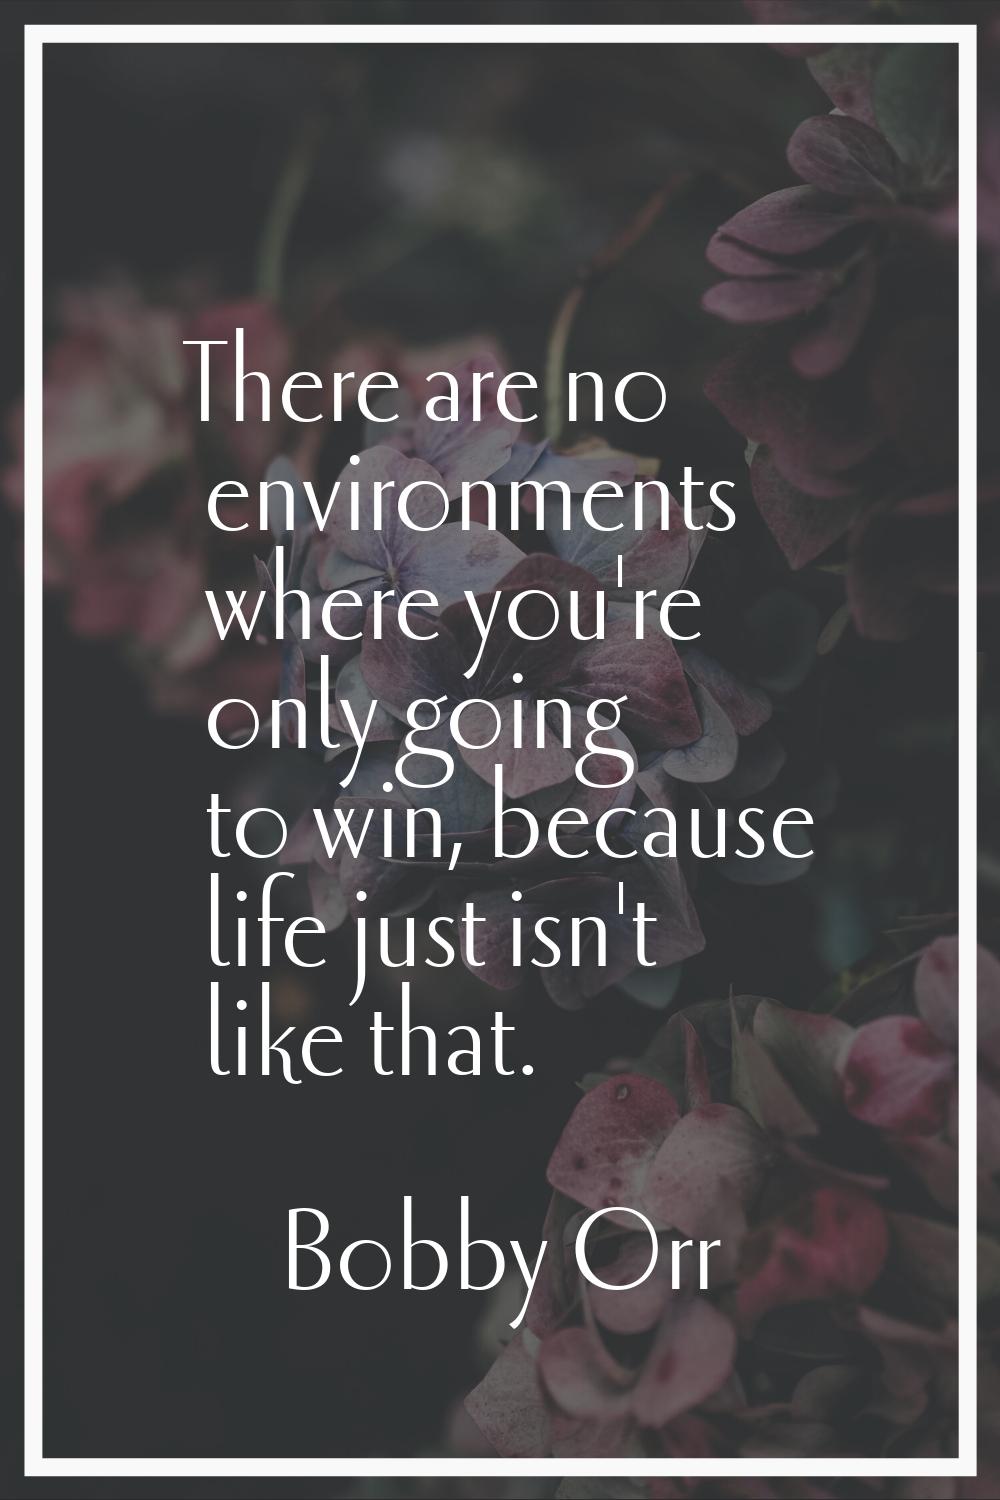 There are no environments where you're only going to win, because life just isn't like that.